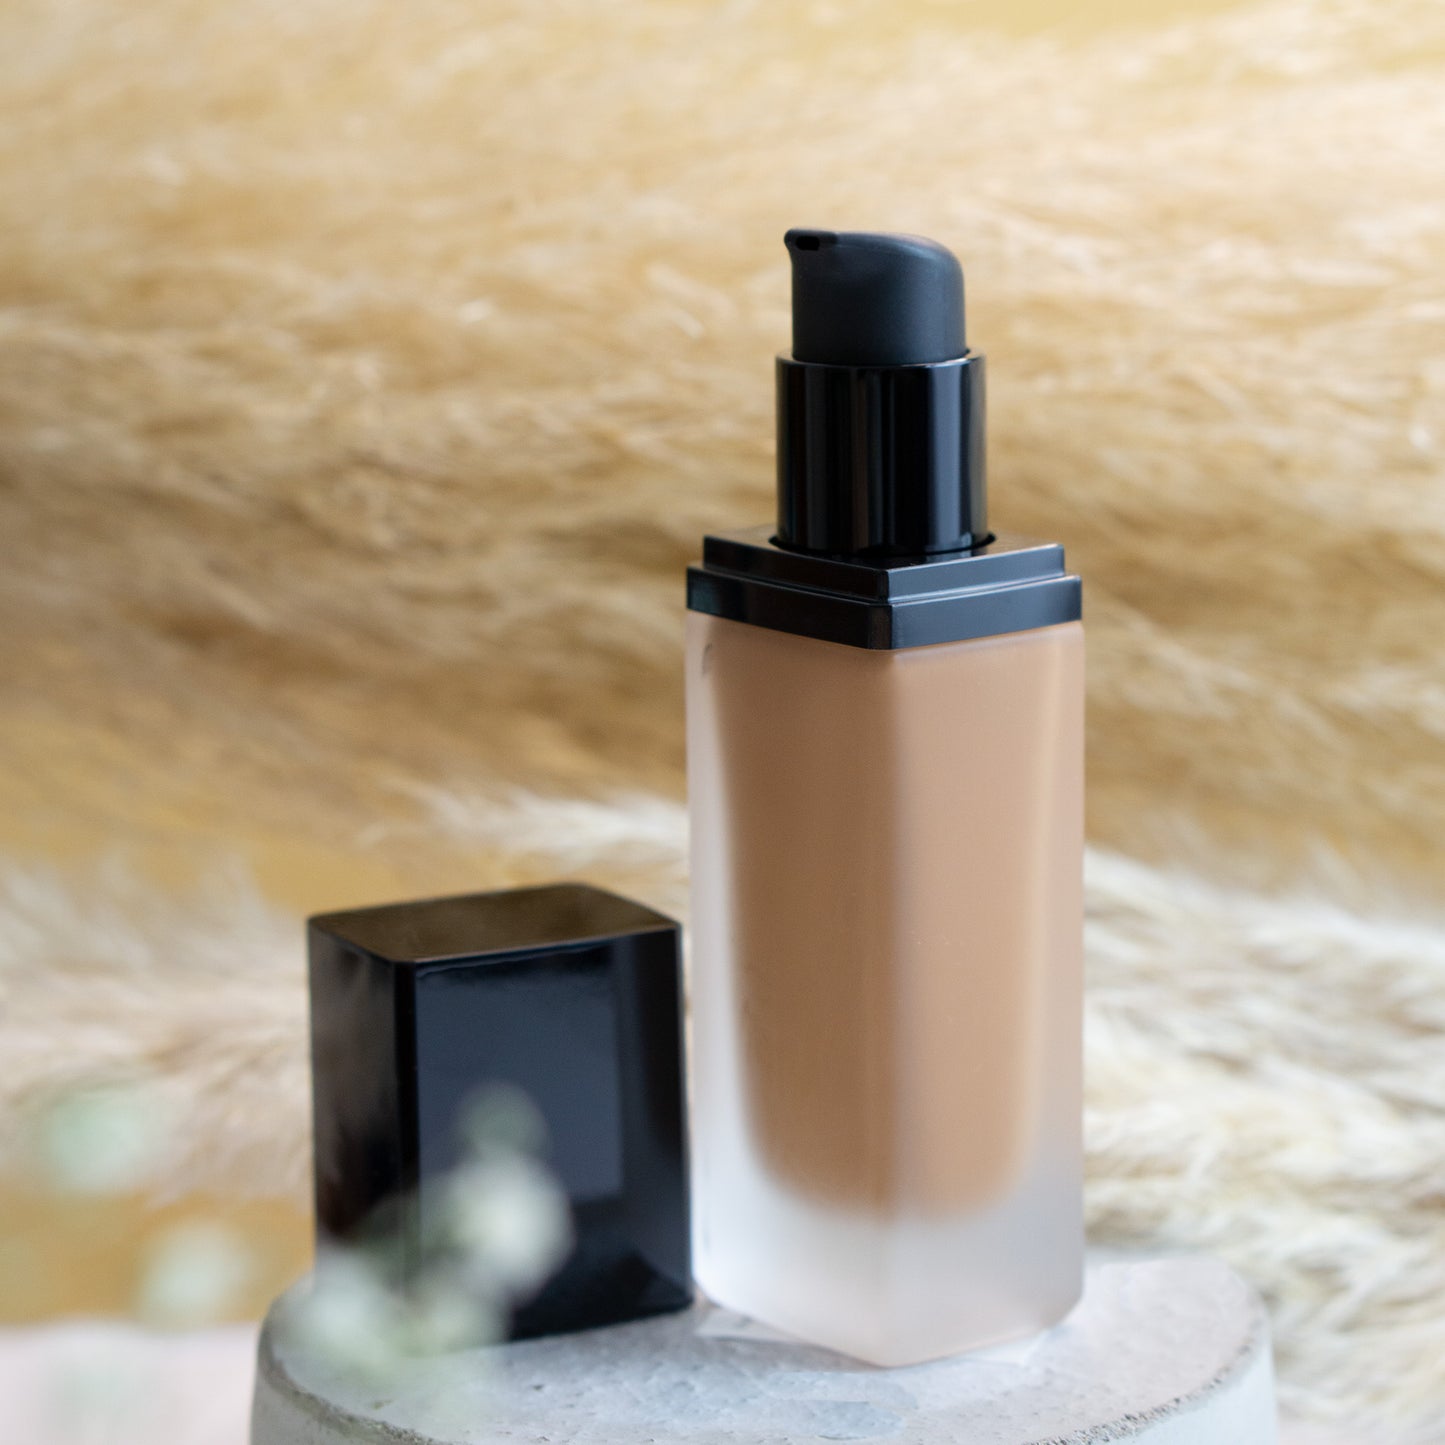 Seashell - Foundation with SPF